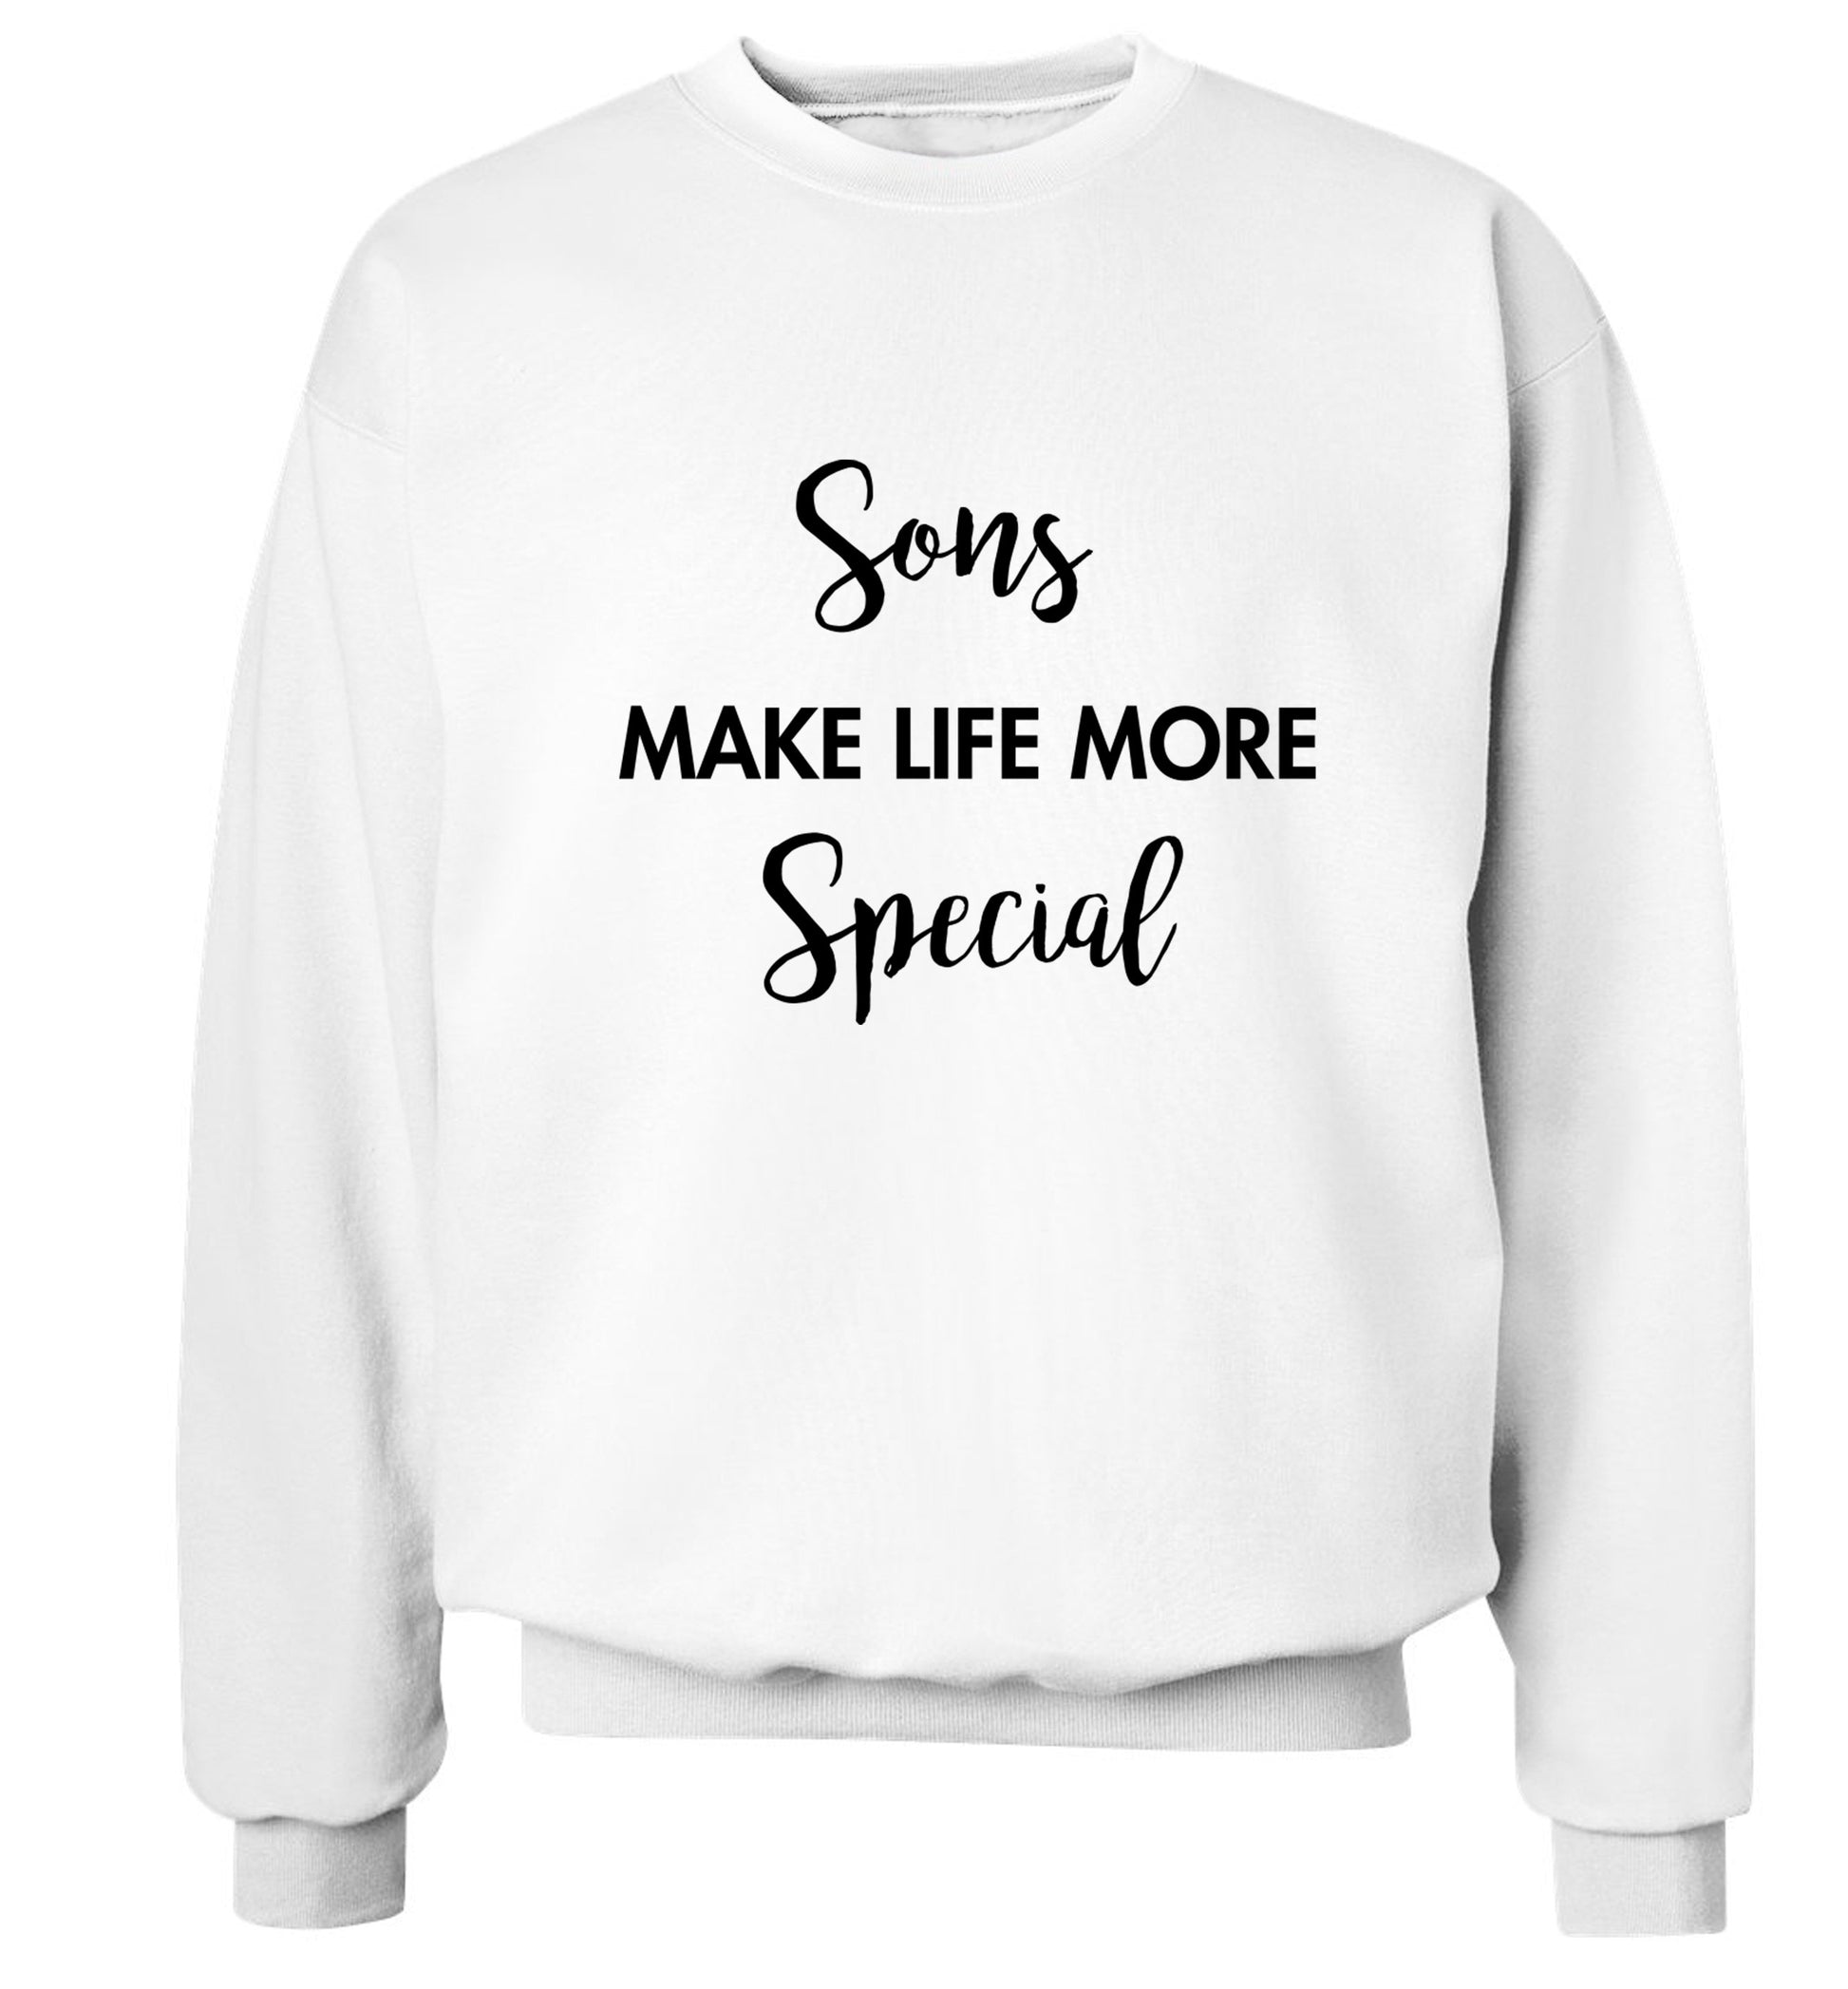 Sons make life more special Adult's unisex white Sweater 2XL